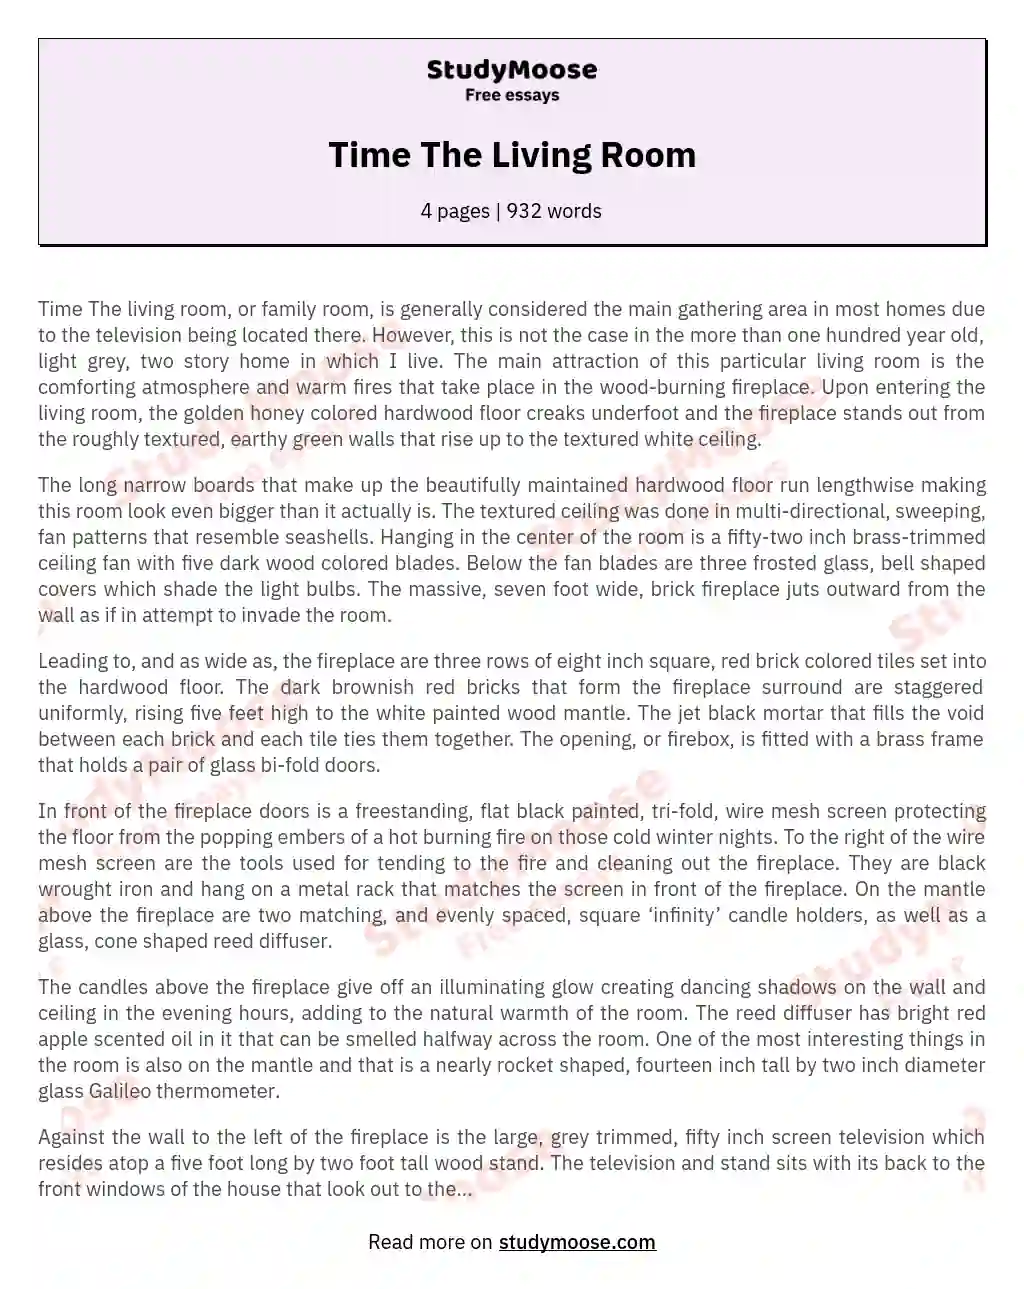 Time The Living Room Free Essay Example